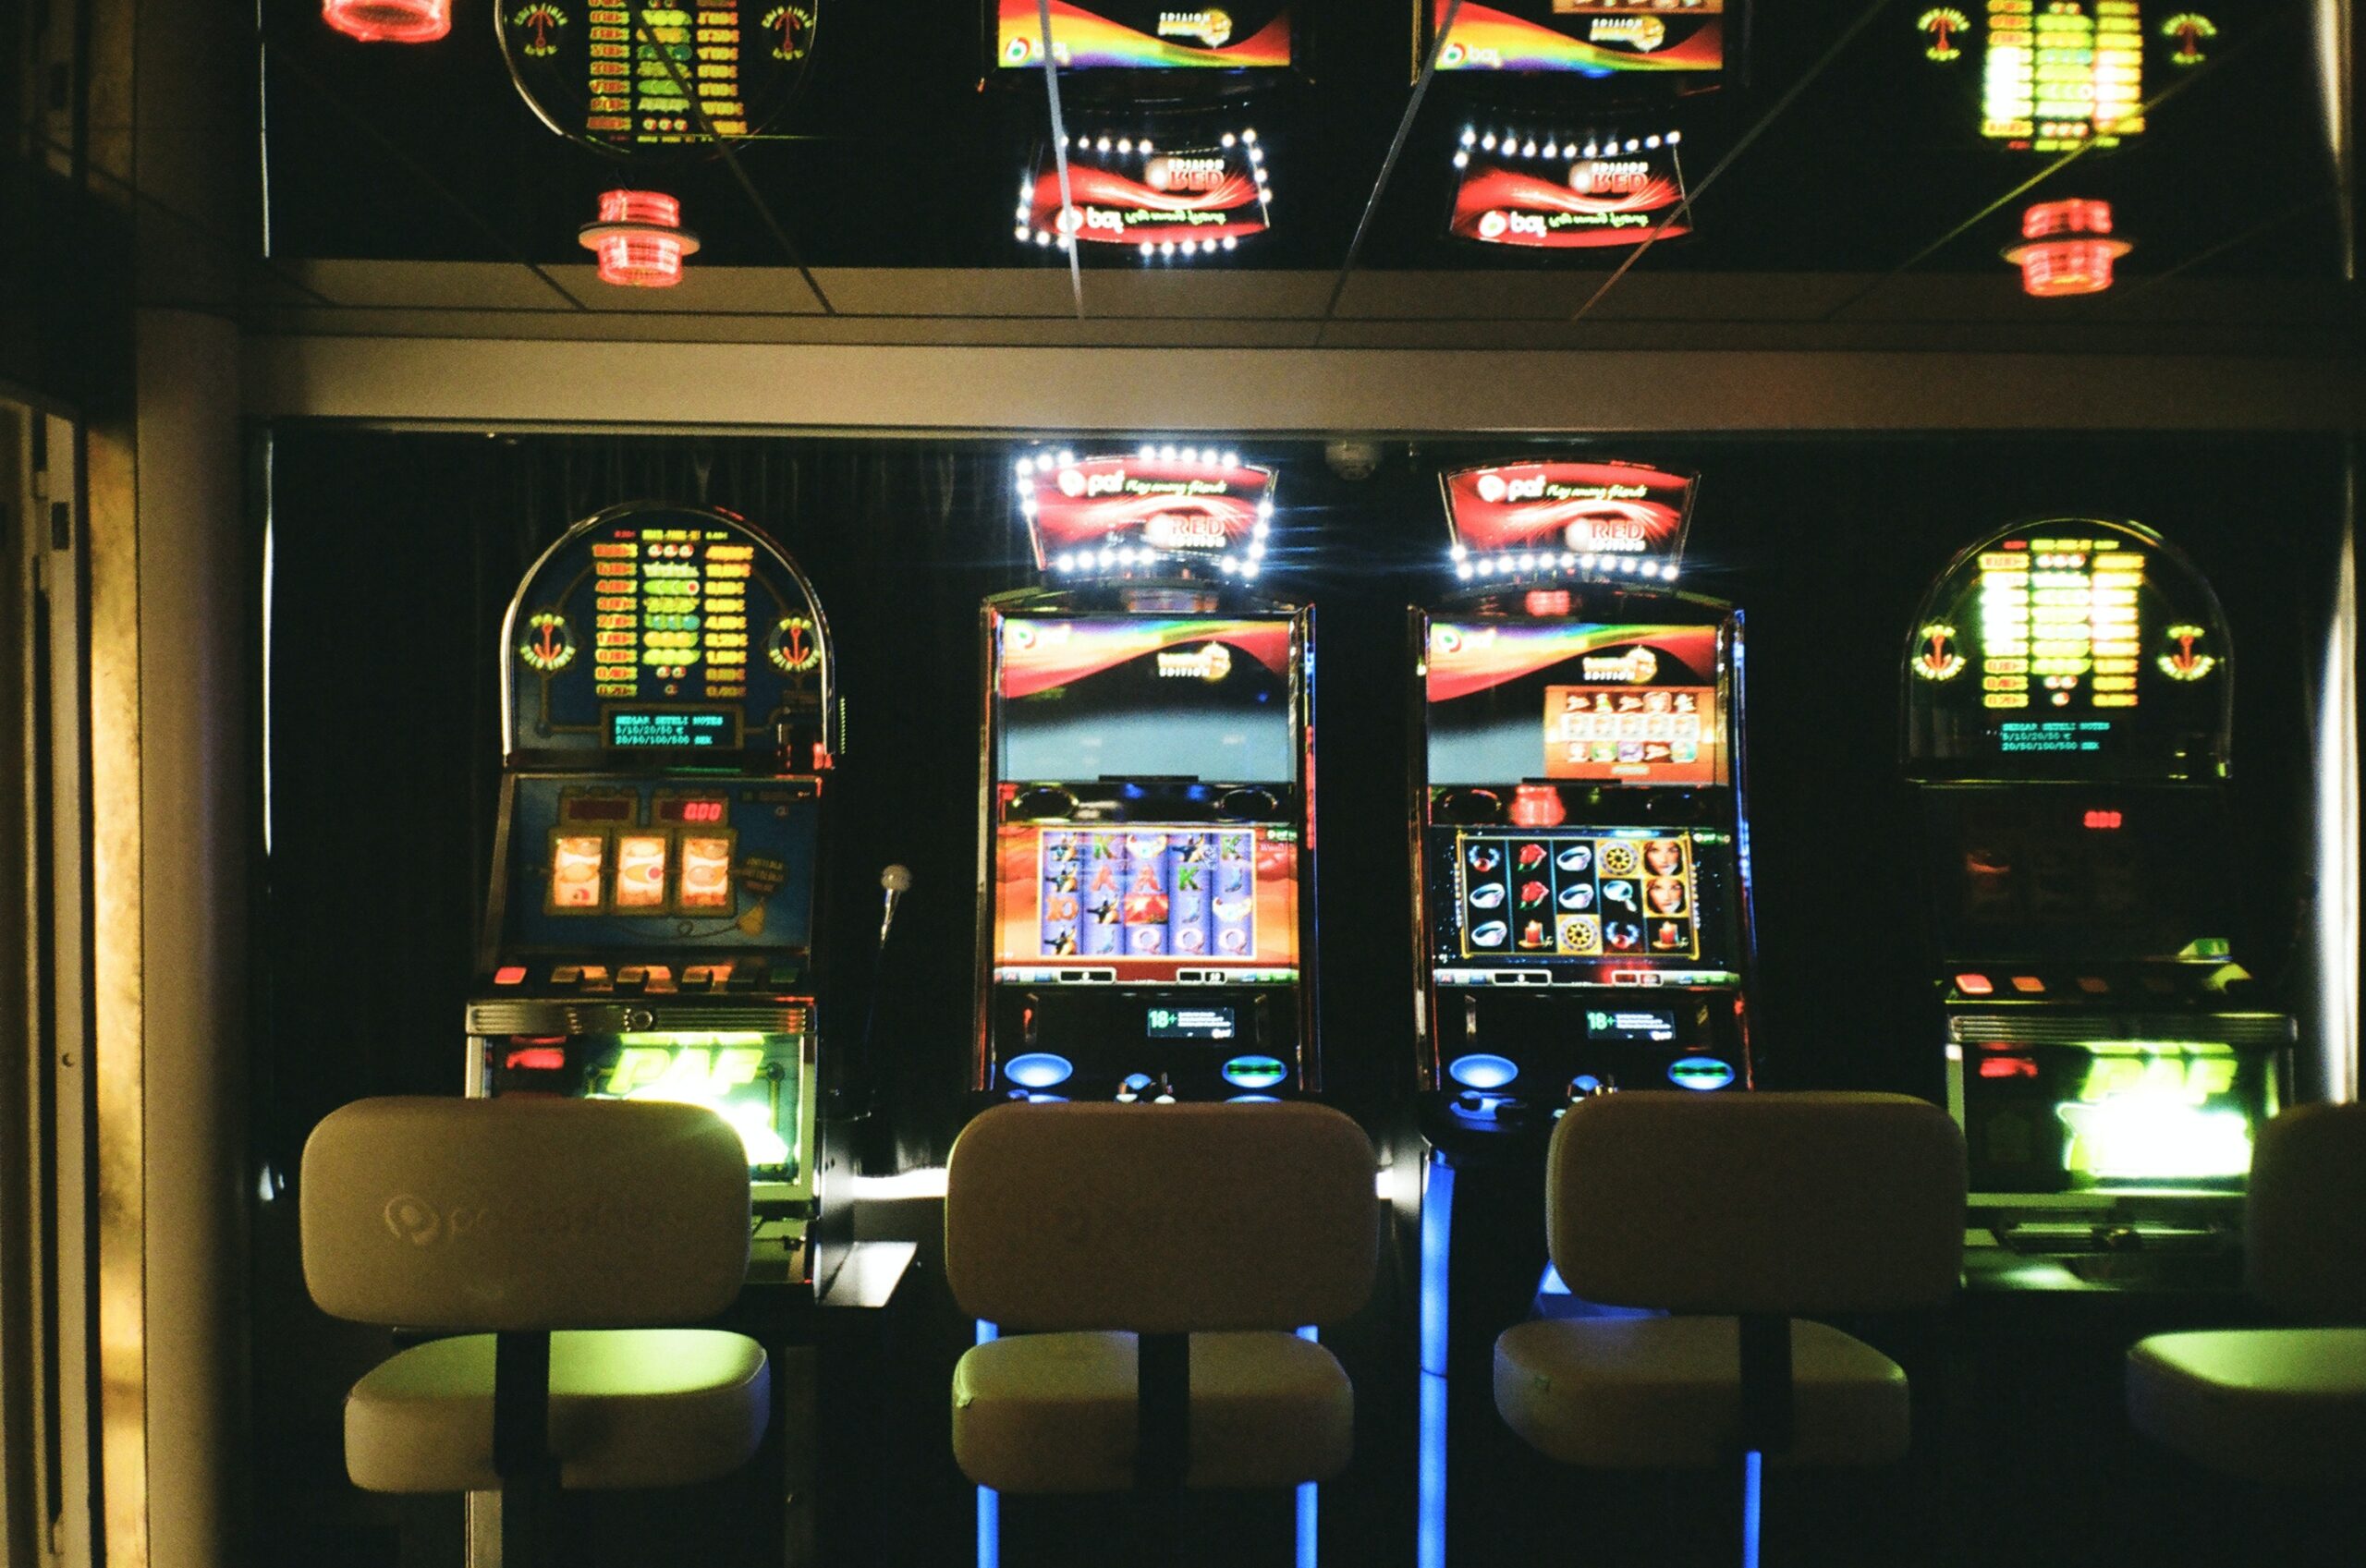 A Deep Dive into the Slot Machine Innovations at BK8 Malaysia